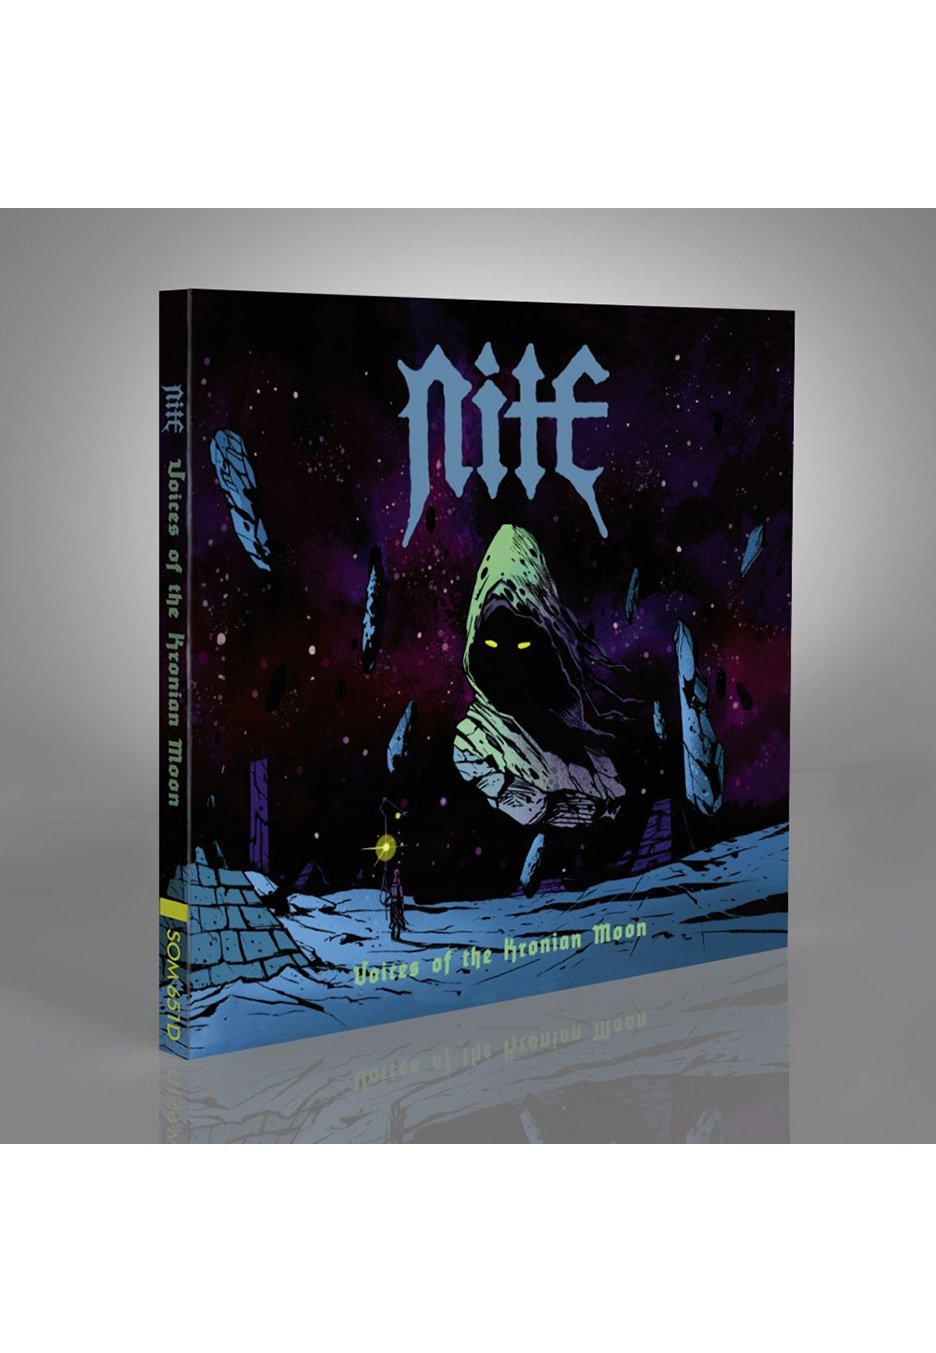 Nite - Voices Of The Kronian Moon - Digipak CD